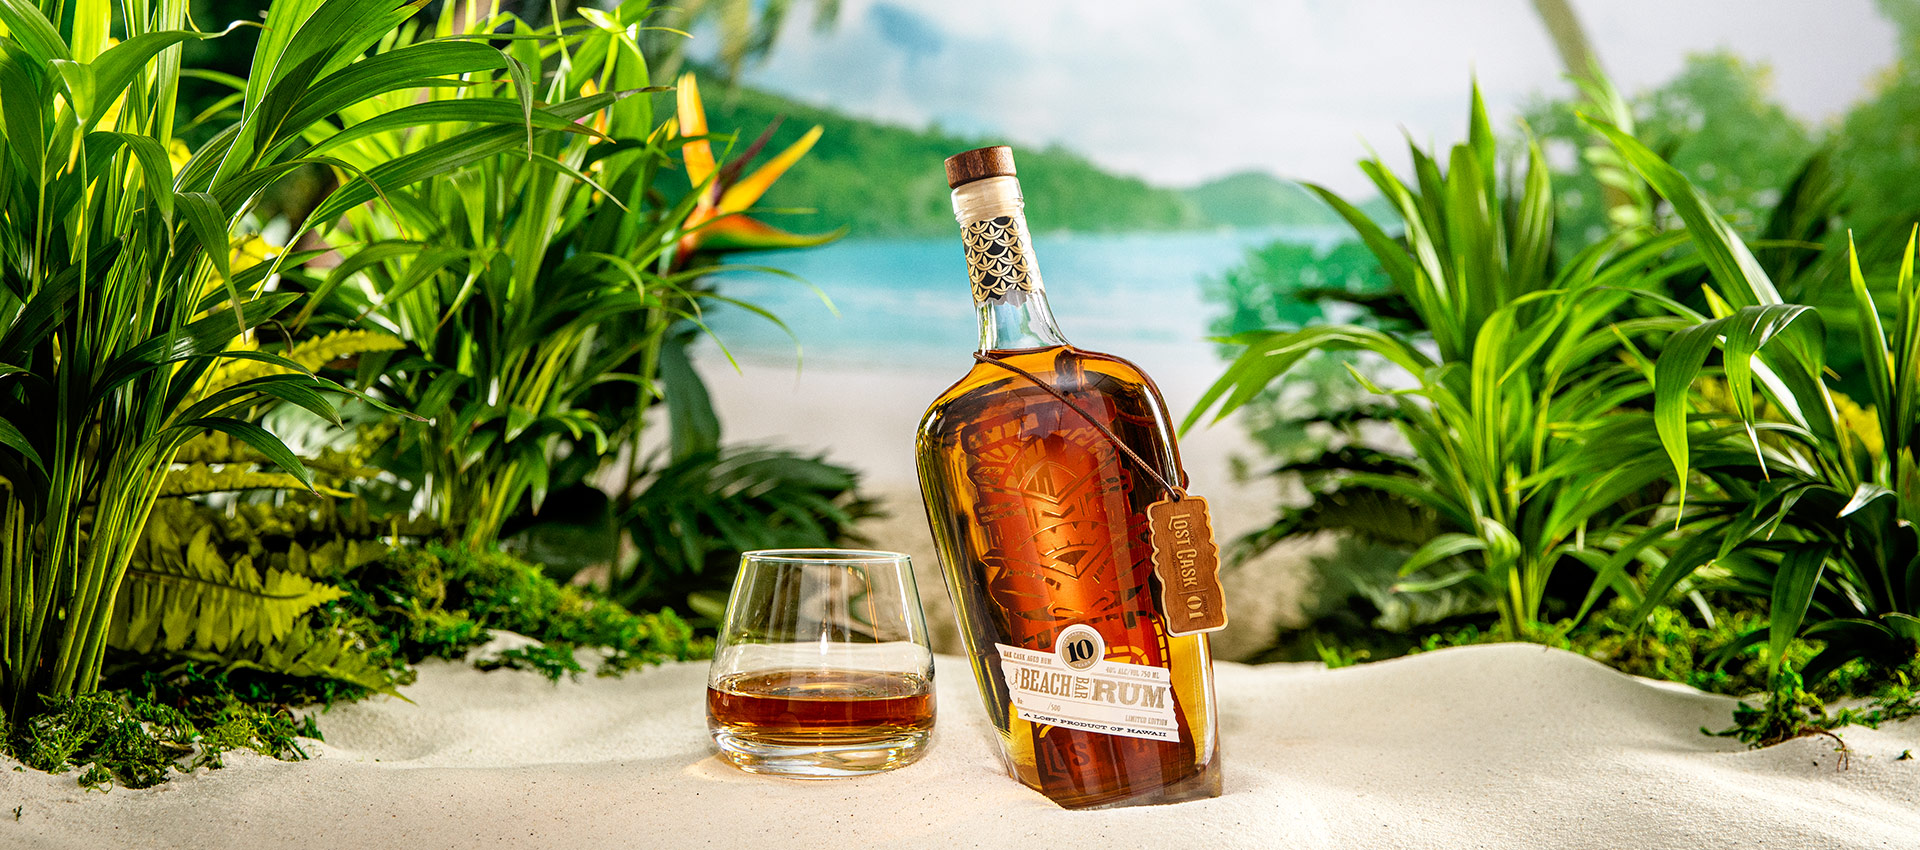 Lost Cask Rum on the beach